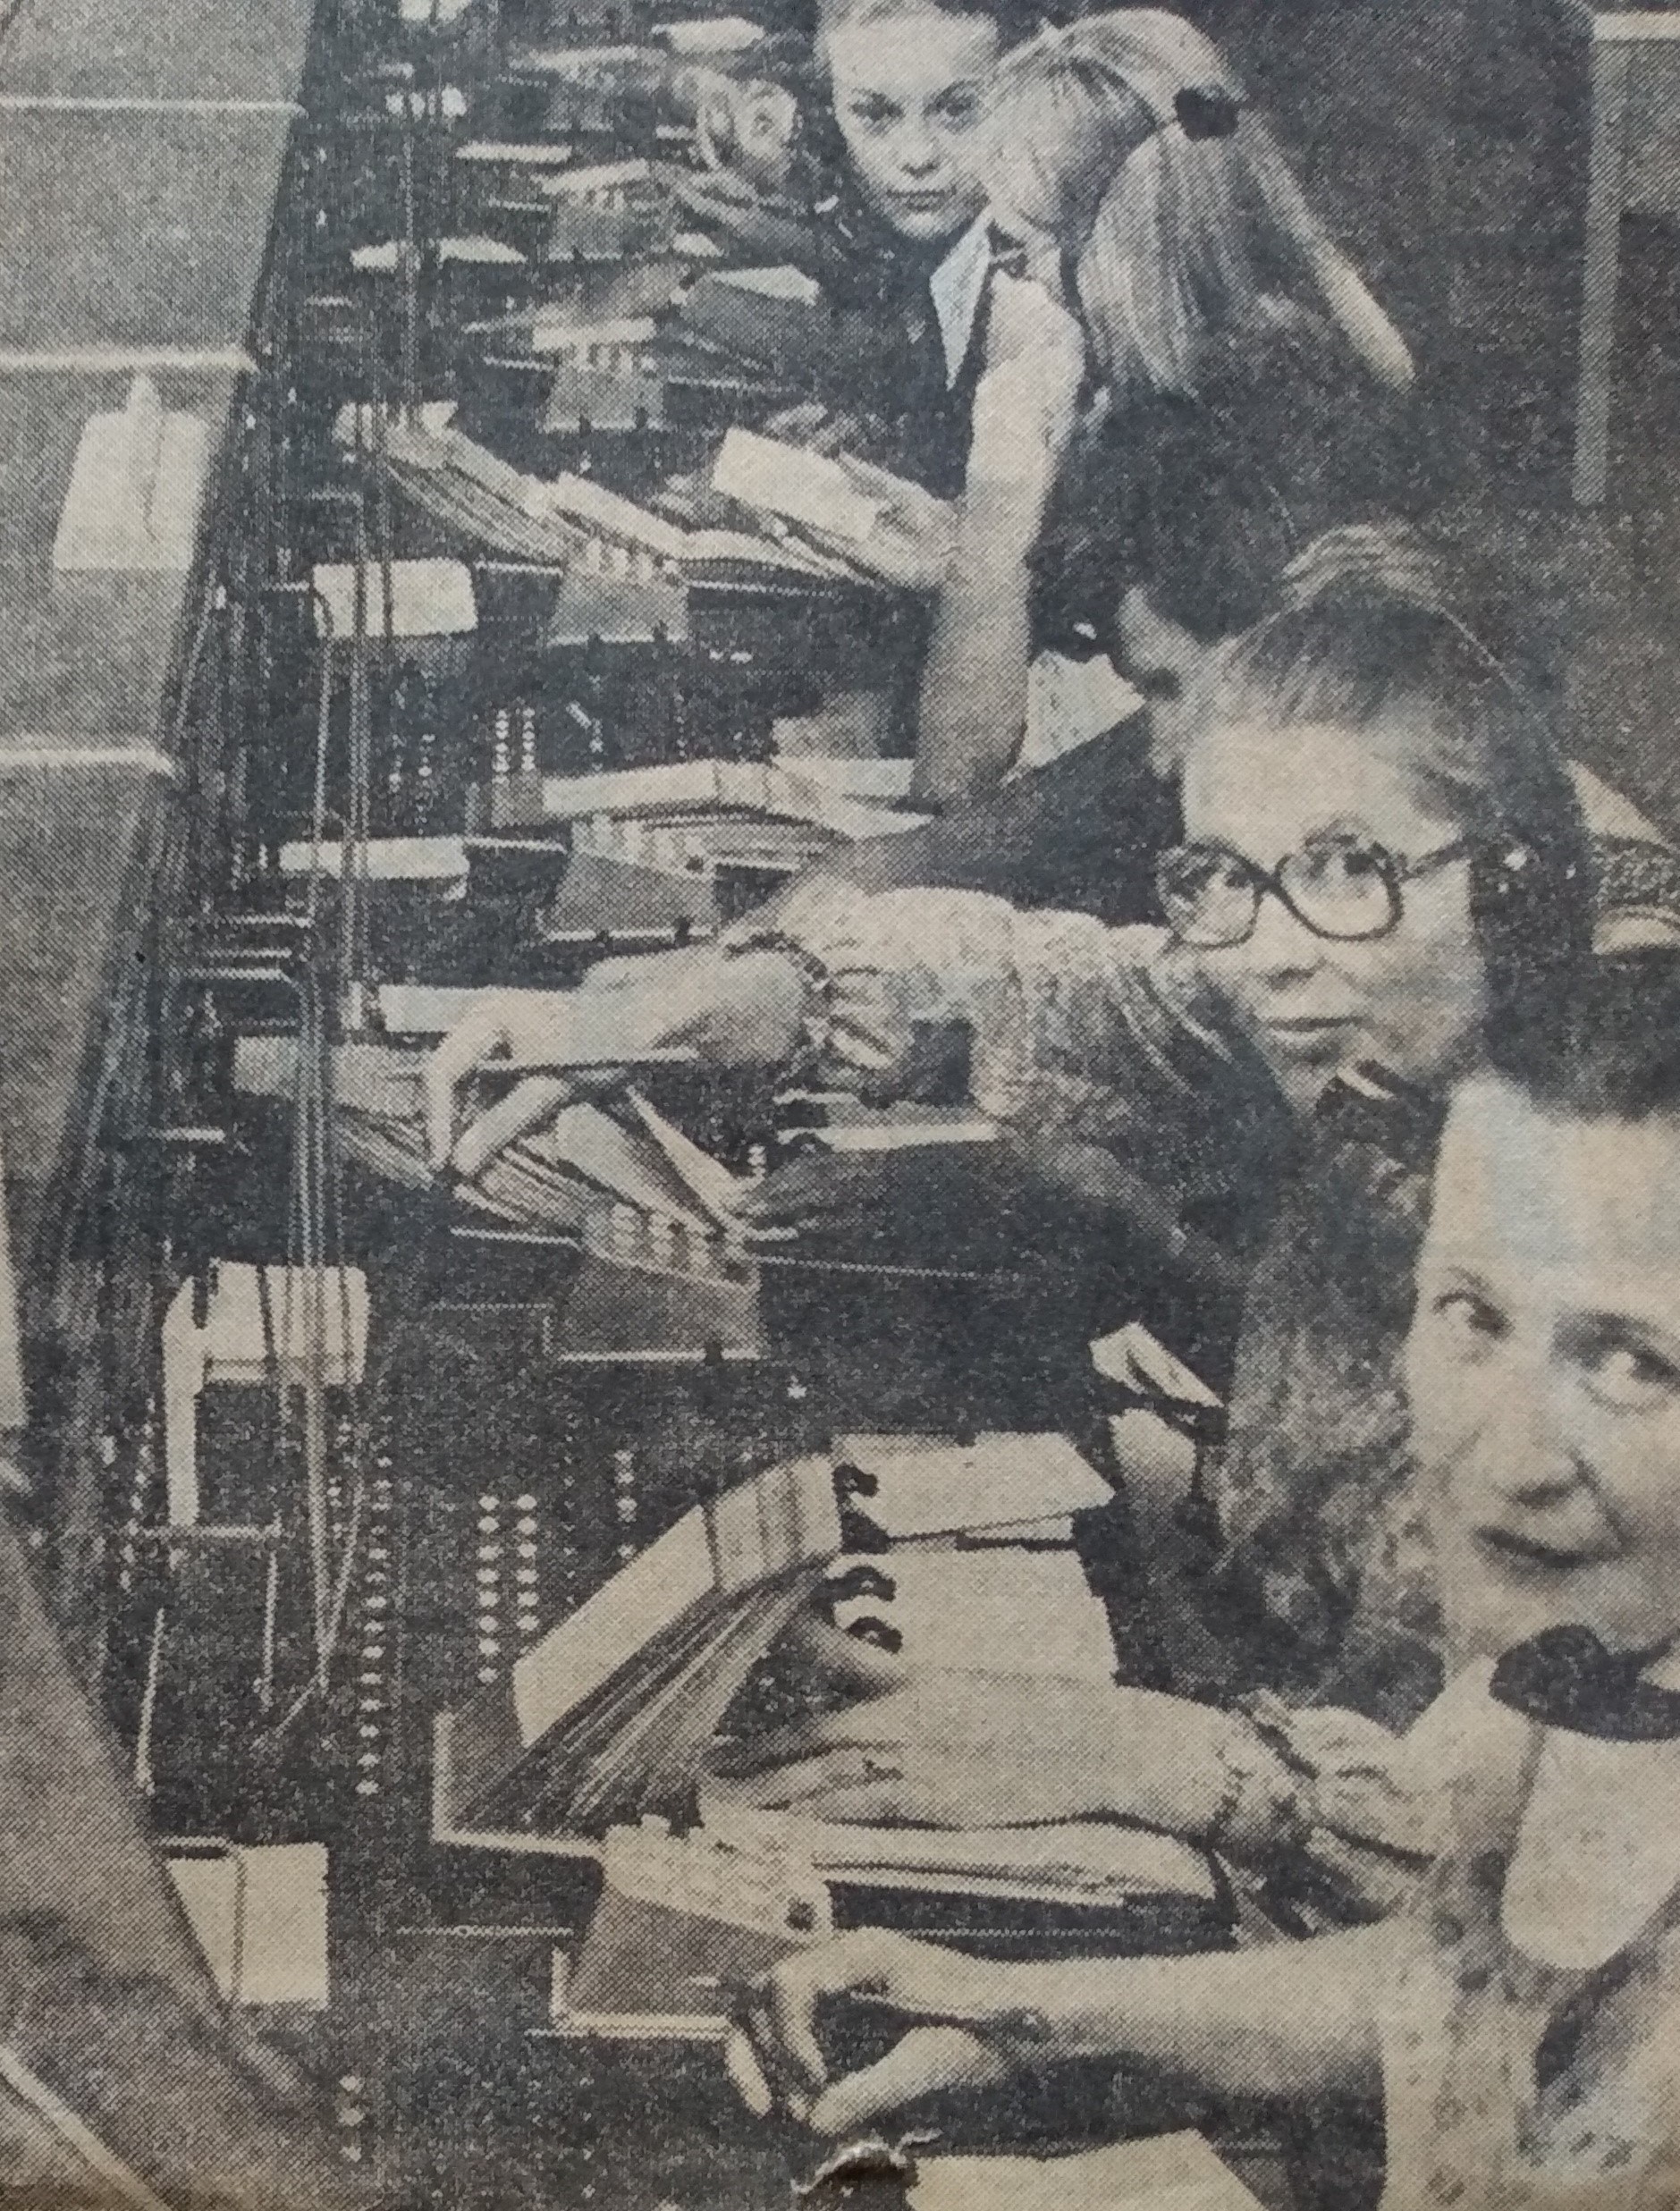 Putting you through... Worcester Telephone Exchange in September 1974 which, in a sign of the times, bore the headline ‘Meet the ‘hello’ dollies’